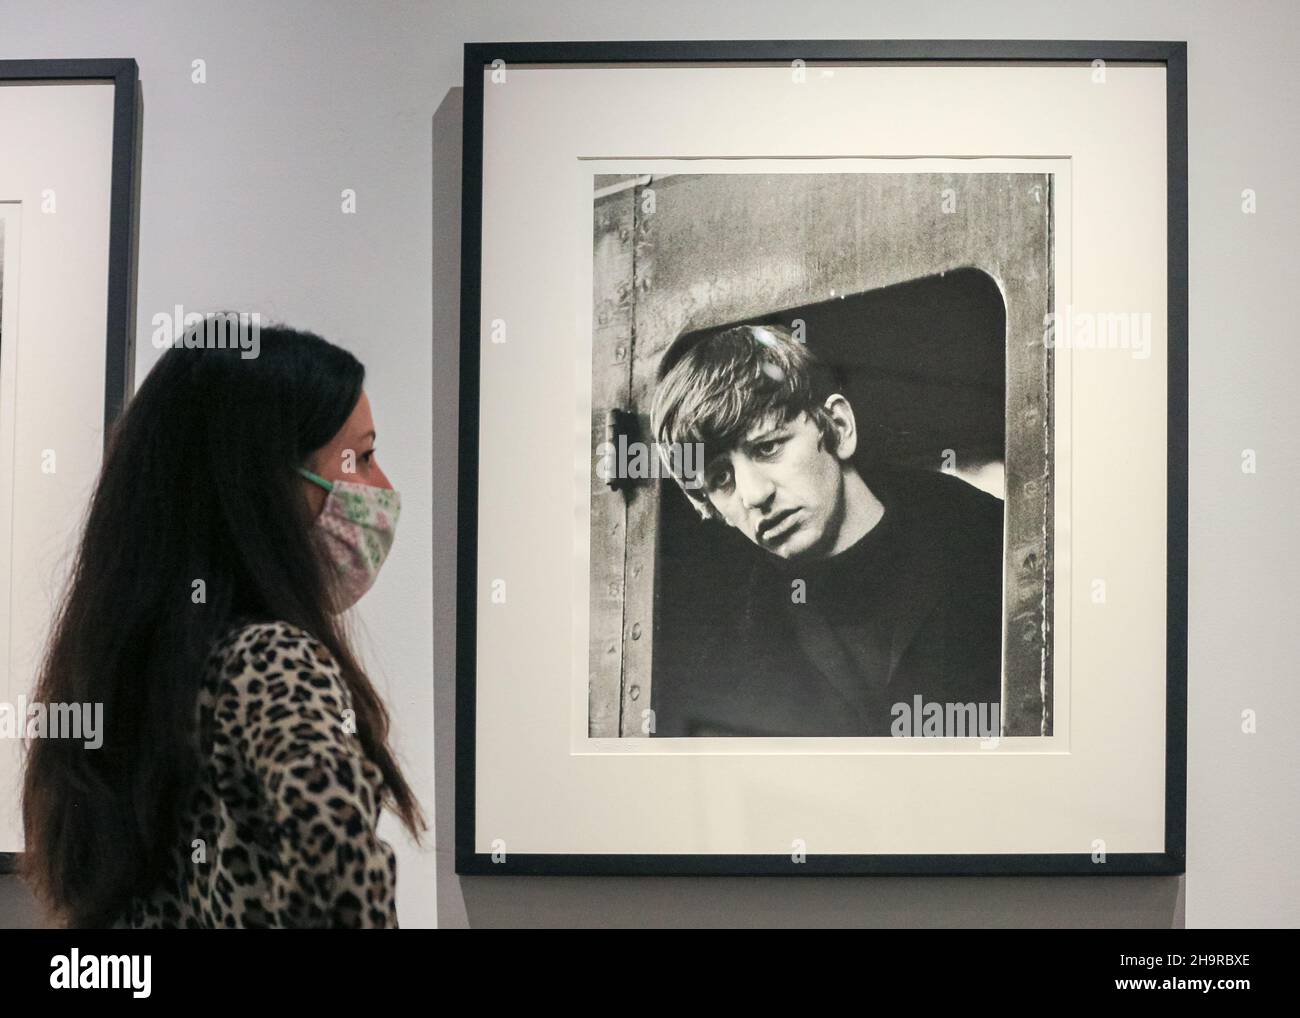 London, UK. 8th Dec, 2021. A staff member looks at the pictures, here Ringo Starr. Rediscovered in family papers after 57 years and developed from negatives, lost photographs of The Beatles are seen in a rare exhibition at Shapero Modern Gallery. The photographer, Lord Thynne, captured candid shots of the band in the spring of 1964, on the set of their first film A Hard Day's Night. The negatives remained undeveloped for fifty-seven years. Credit: Imageplotter/Alamy Live News Stock Photo